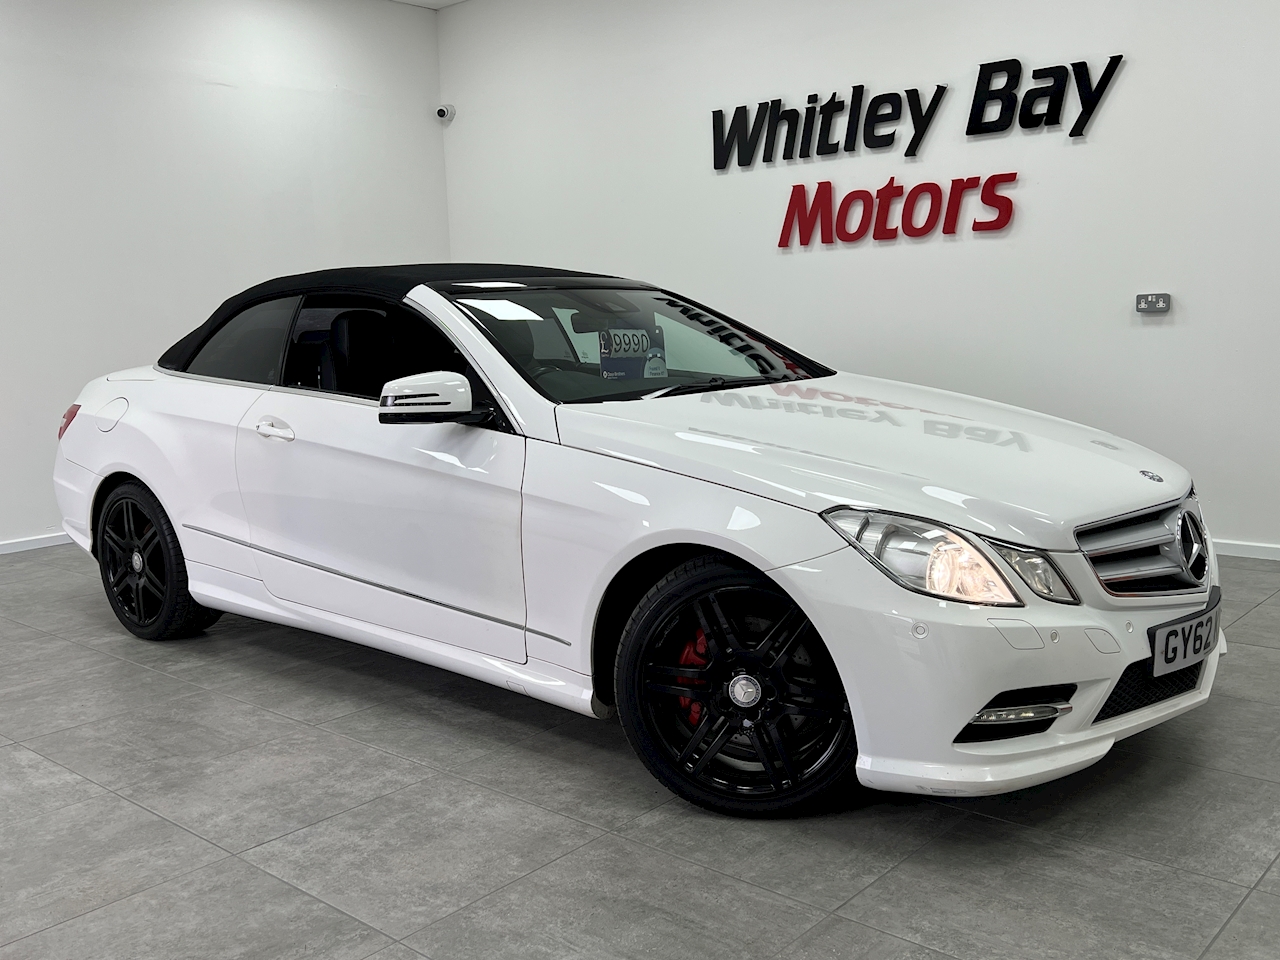 3.0 E350 CDI V6 BlueEfficiency Sport Cabriolet 2dr Diesel G-Tronic Euro 5 (265 ps)